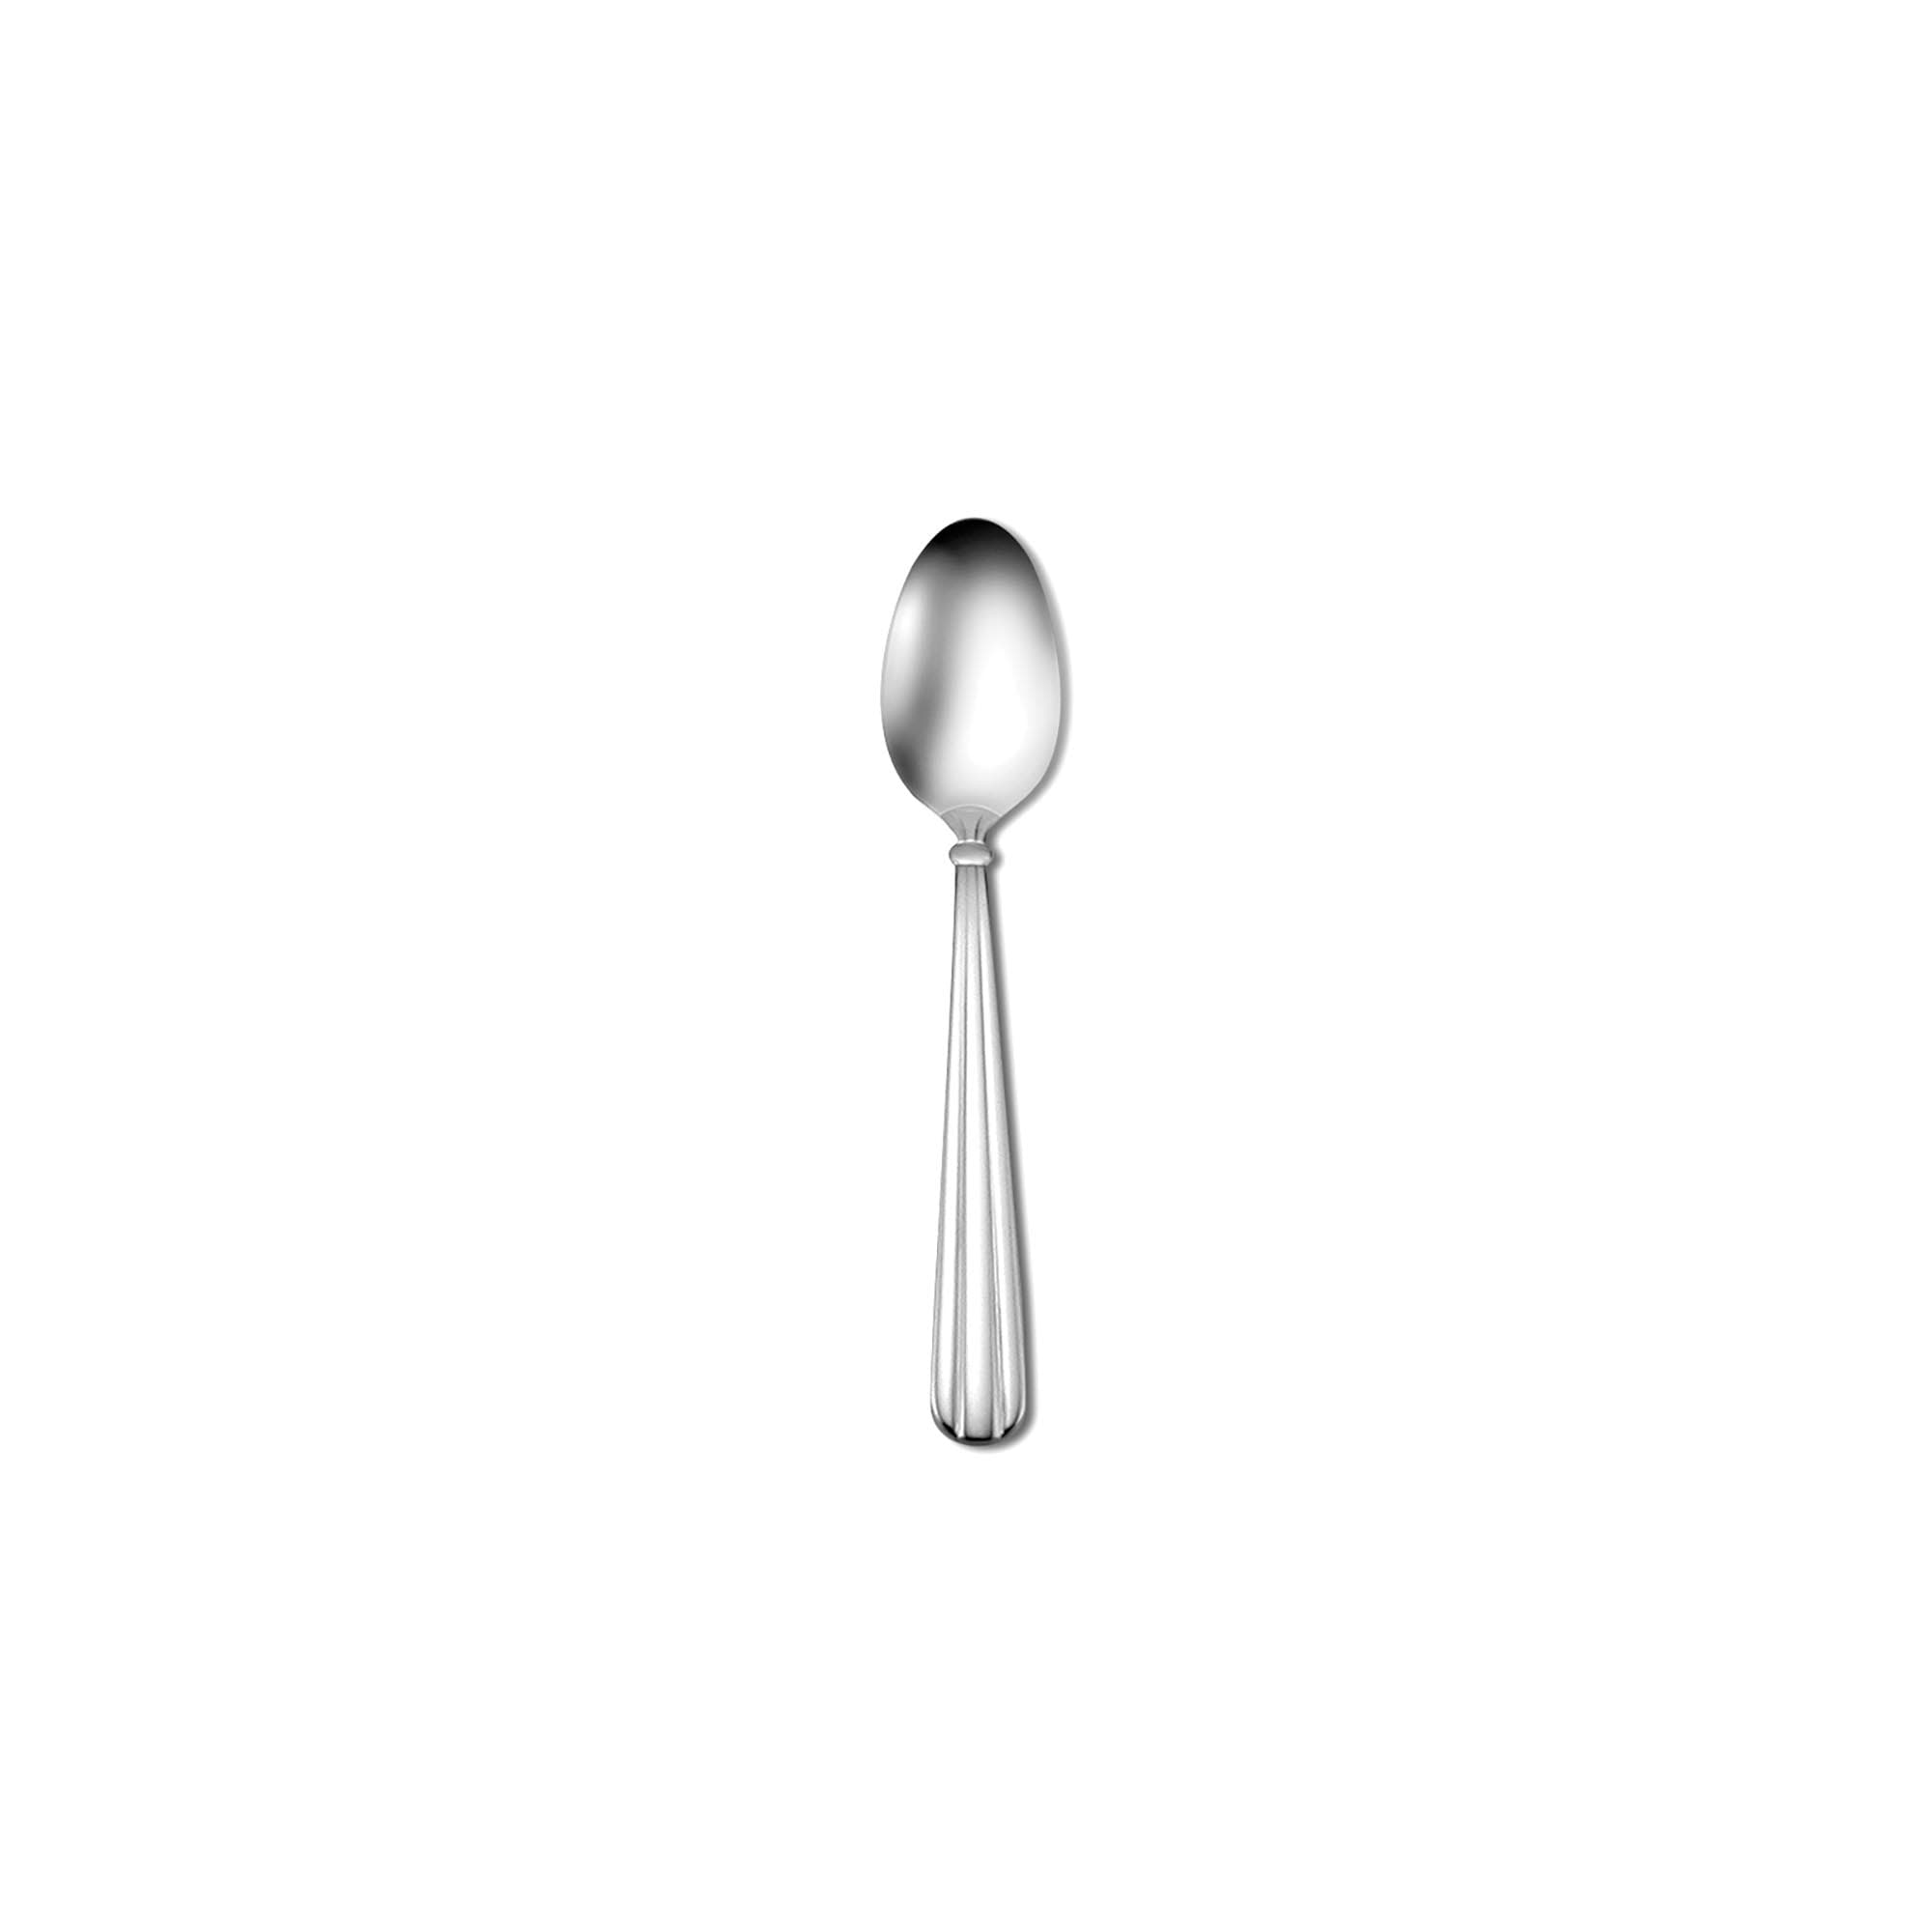 https://ak1.ostkcdn.com/images/products/is/images/direct/41d110ce9d096a6c5529ff5341a8ddd8326ee518/Oneida-18-10-Stainless-Steel-Unity-Coffee-Spoons-%28Set-of-36%29.jpg